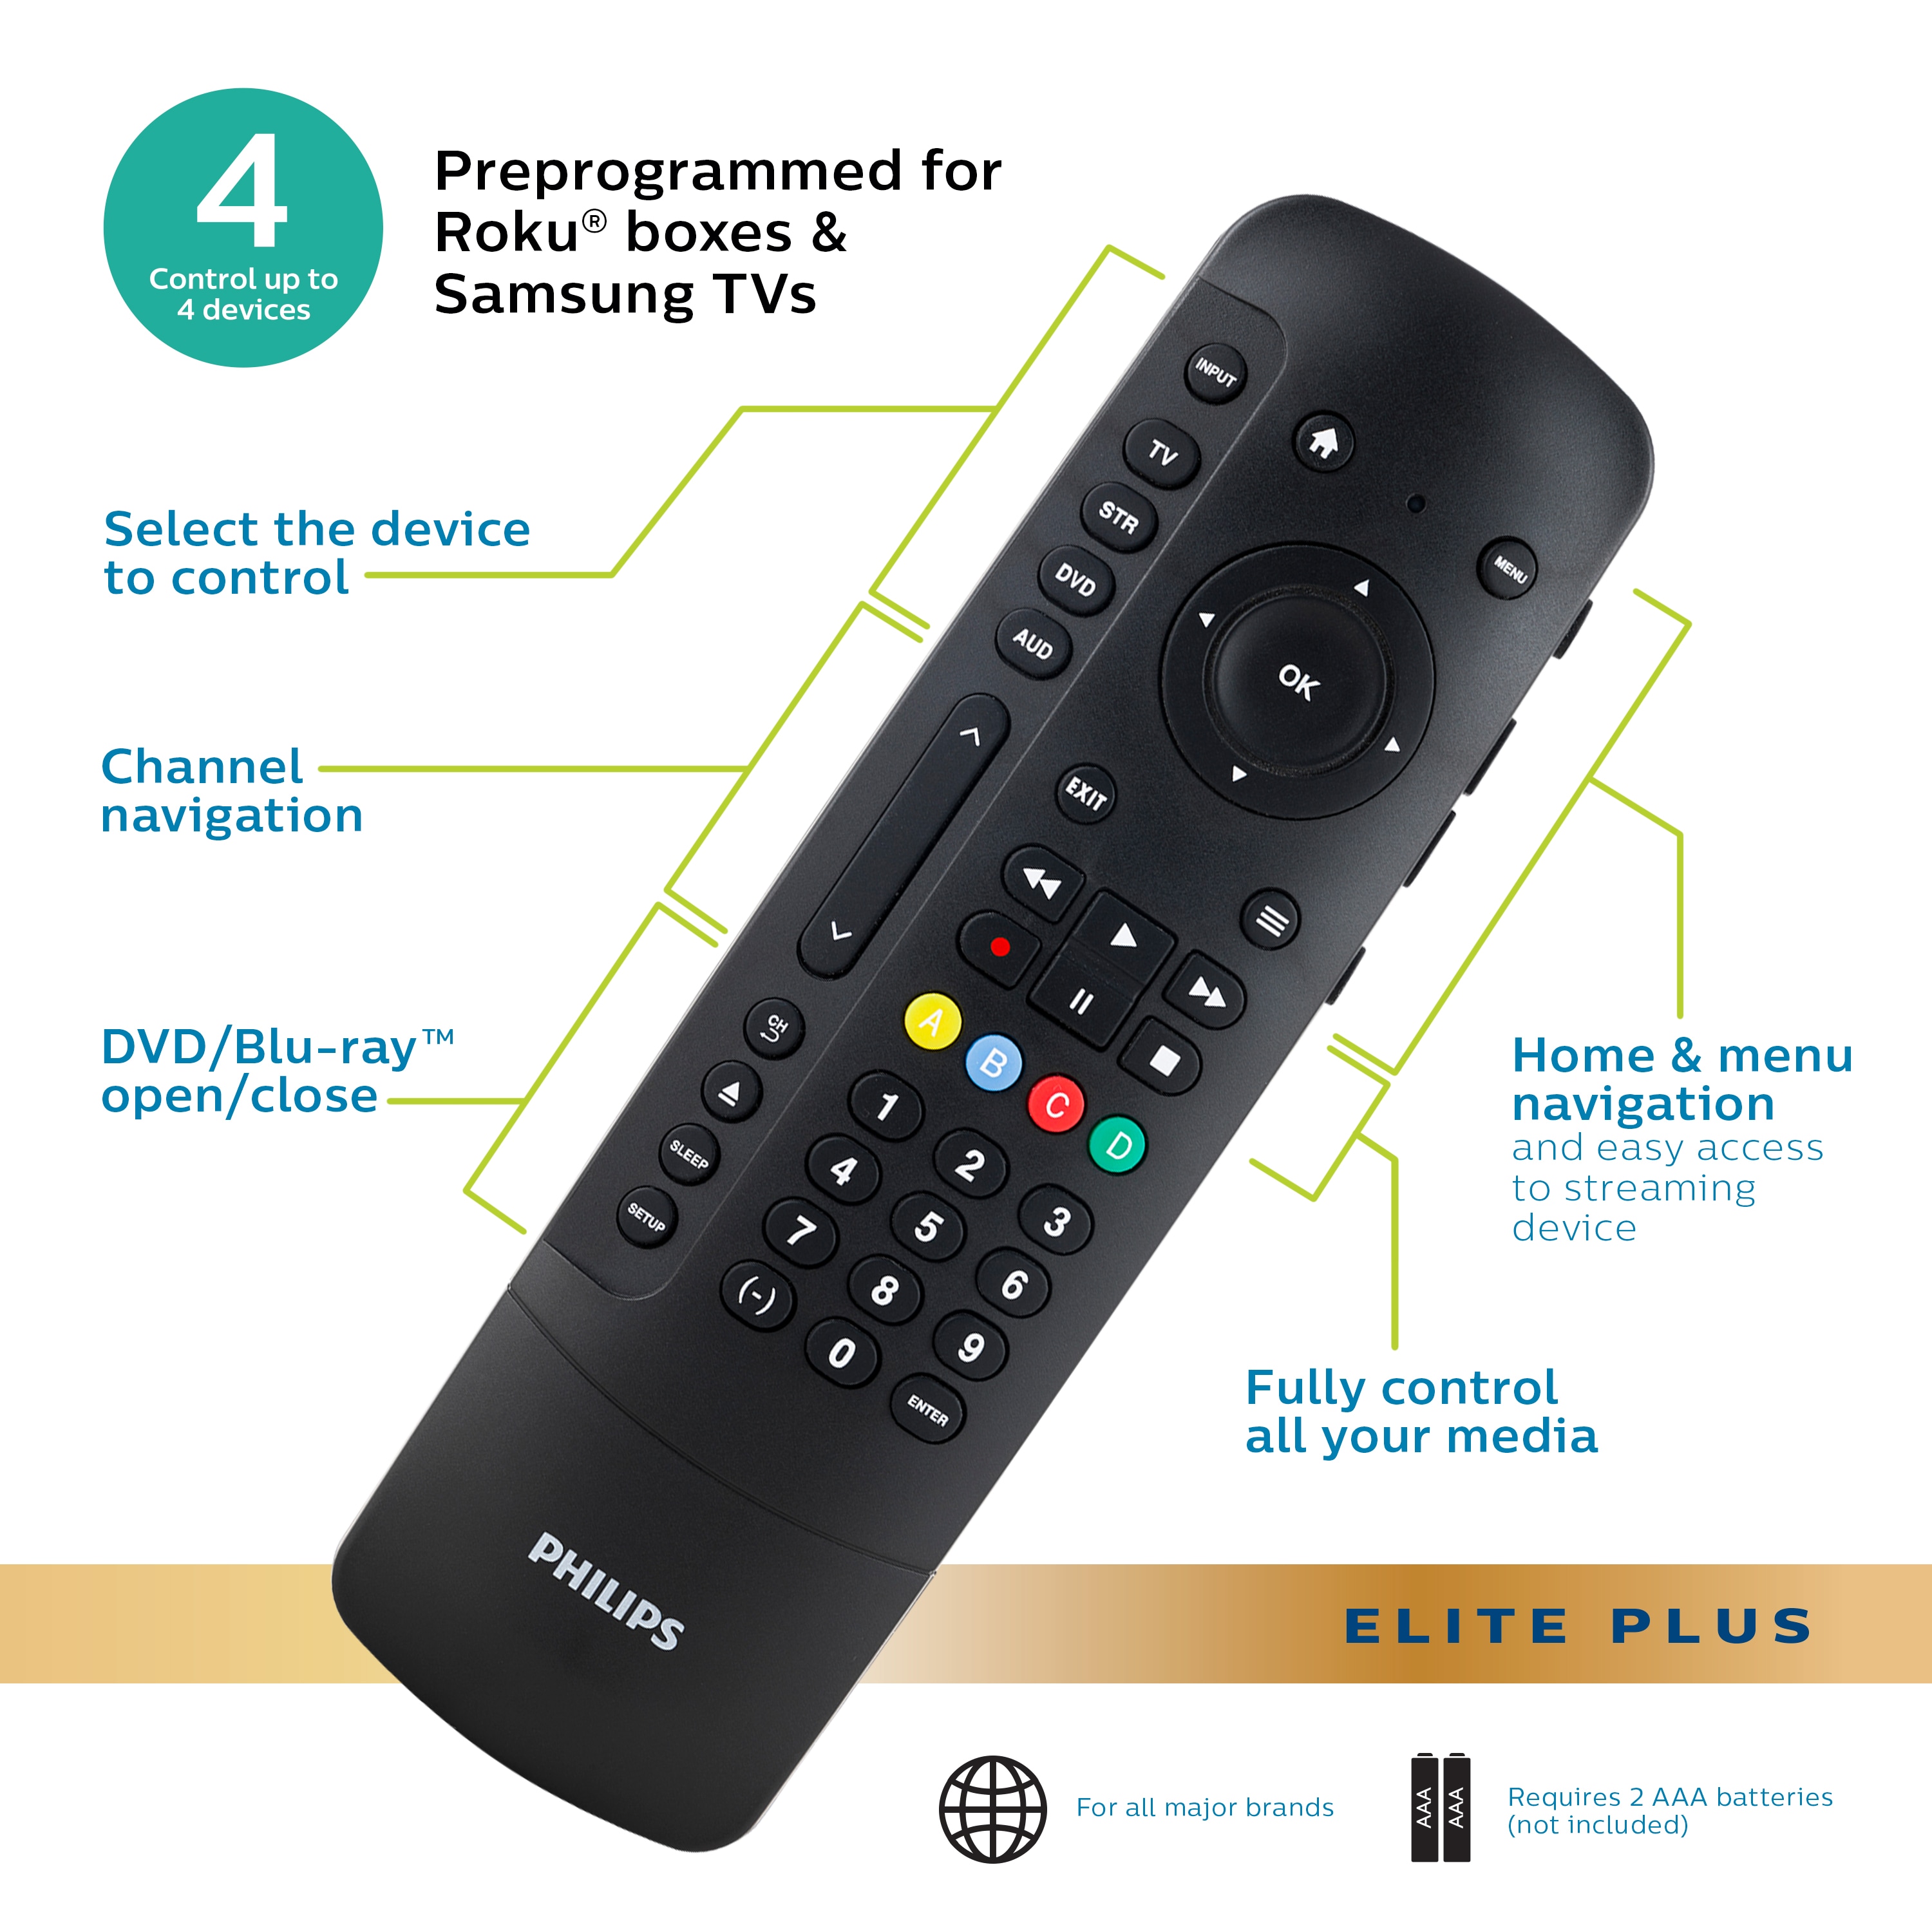 Remote control for Philips